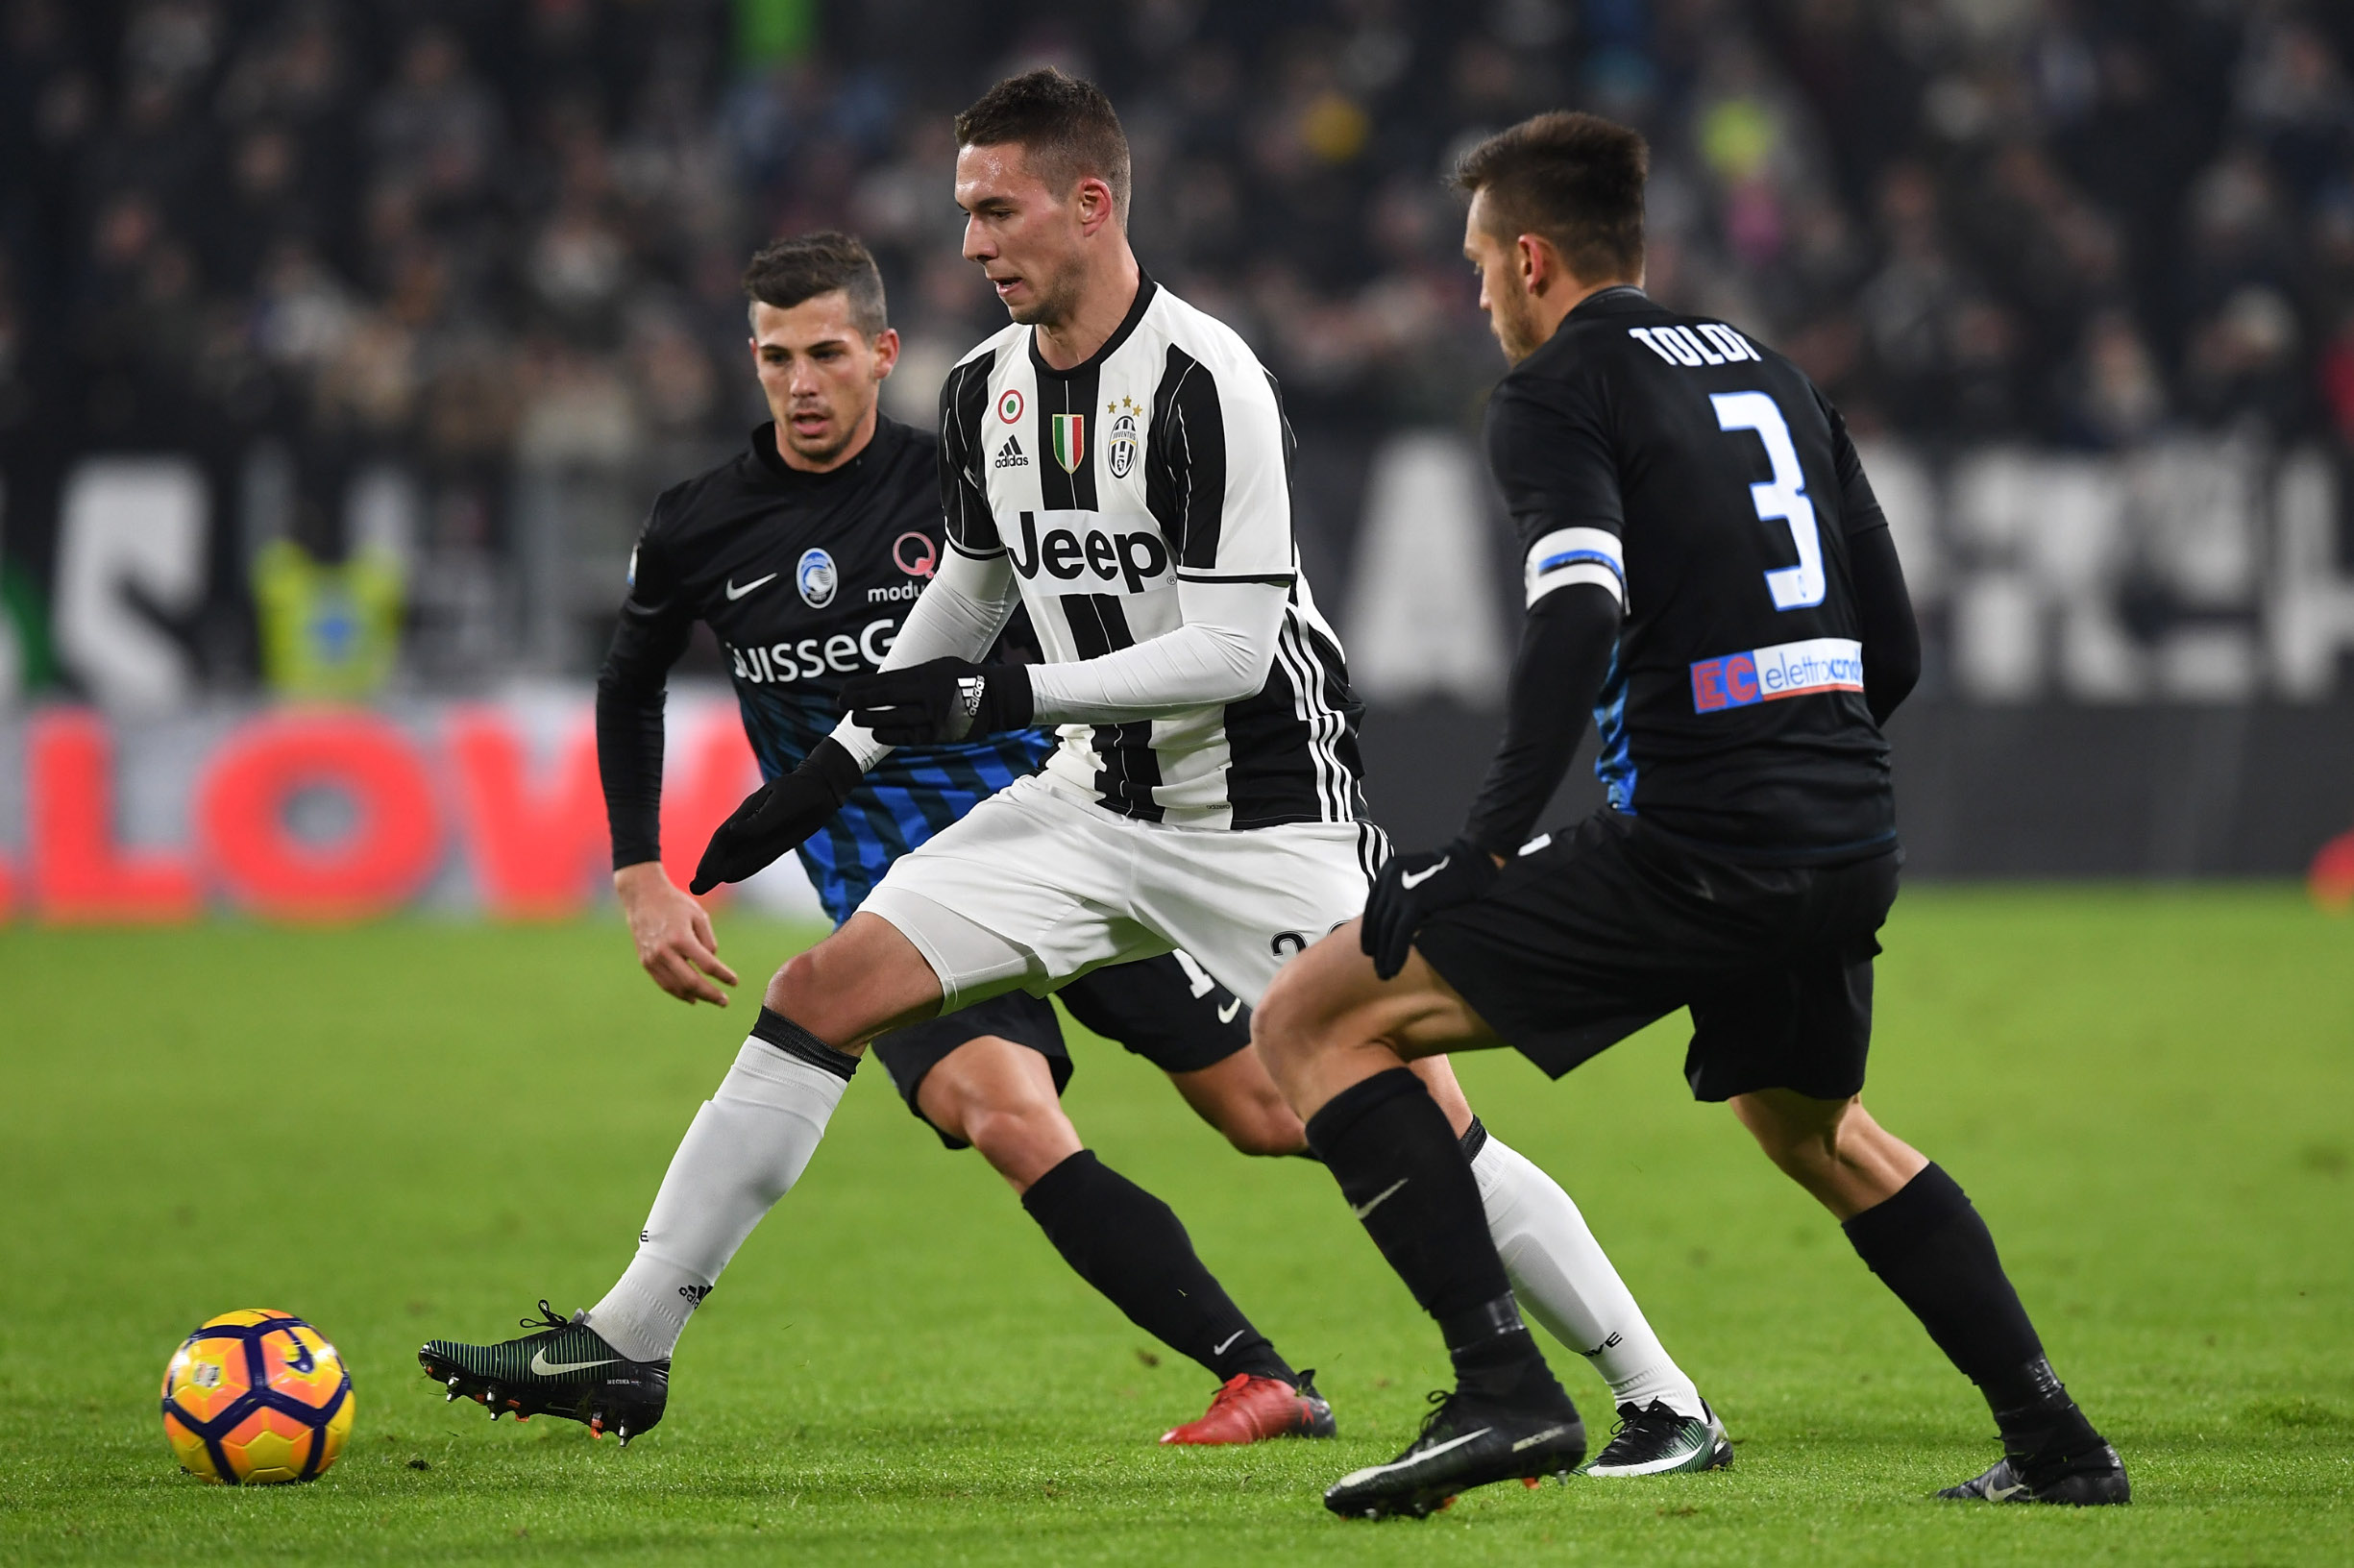 TURIN, ITALY - JANUARY 11:  Marko Pjaca (C) of FC Juventus is challenged by Remo Freuler (L) and Rafael Toloi of Atalanta BC during the TIM Cup match between FC Juventus and Atalanta BC at Juventus Stadium on January 11, 2017 in Turin, Italy.  (Photo by Valerio Pennicino/Getty Images)